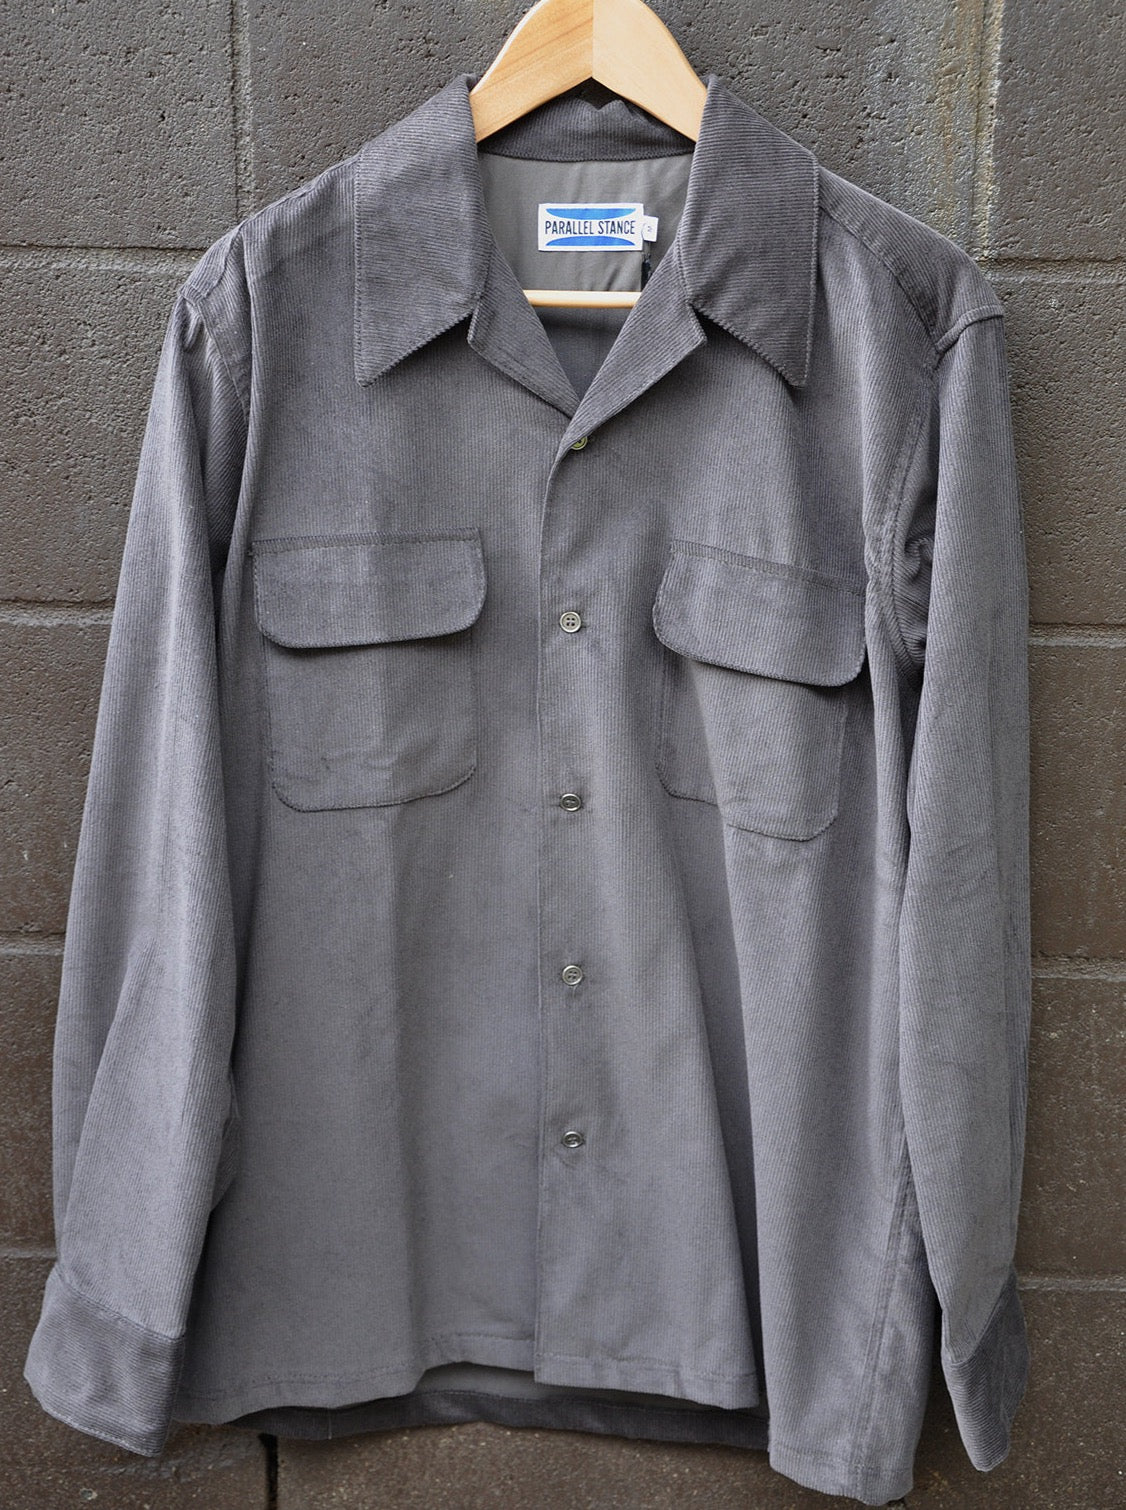 Shirt Button Down "Perfect Wave" Corduroy - Charcoal by Parallel Stance